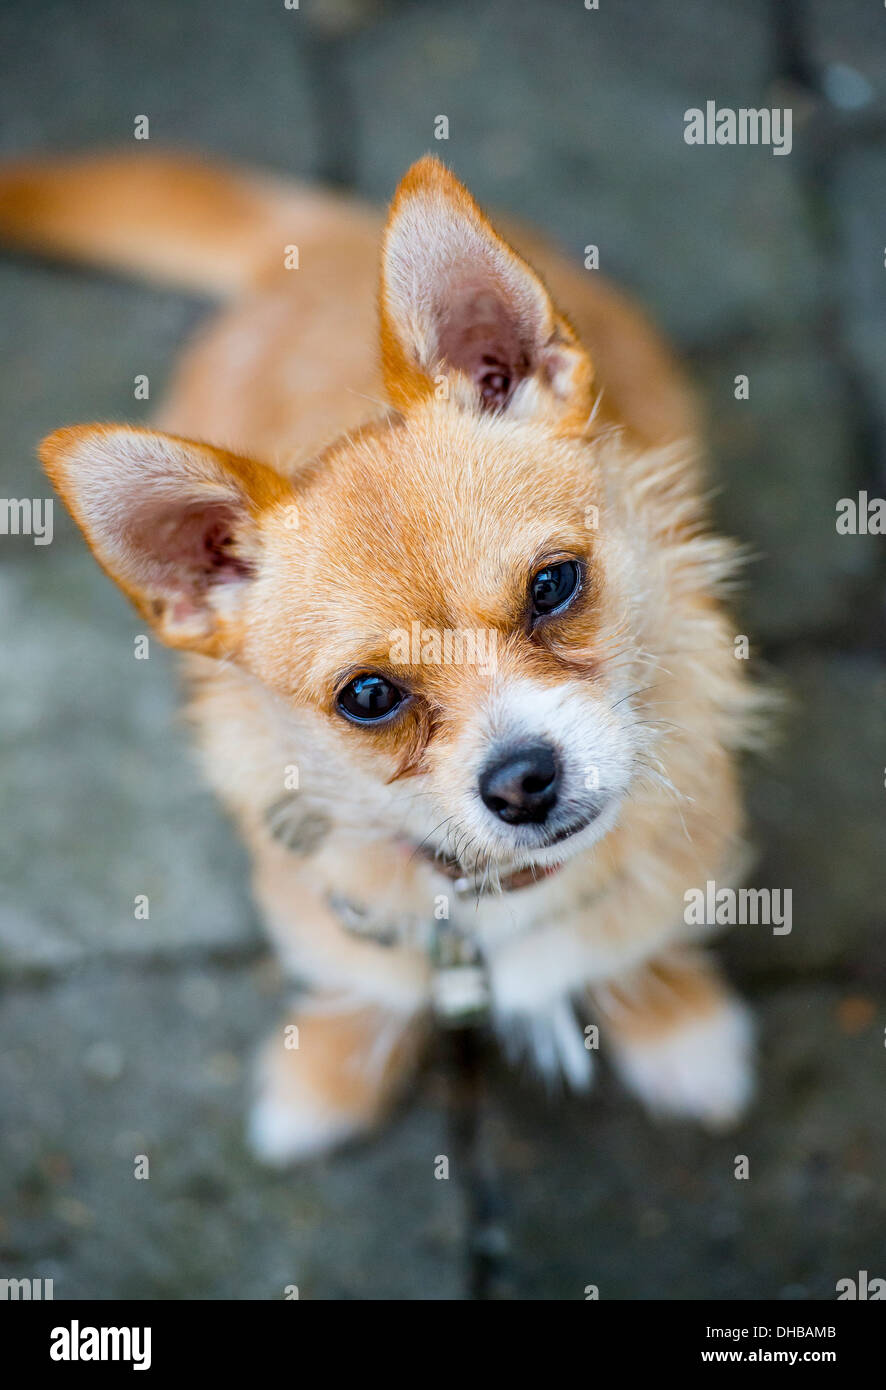 A Chihuahua crossed between a Jack Russell dog gazes into the camera with loving eyes Stock Photo